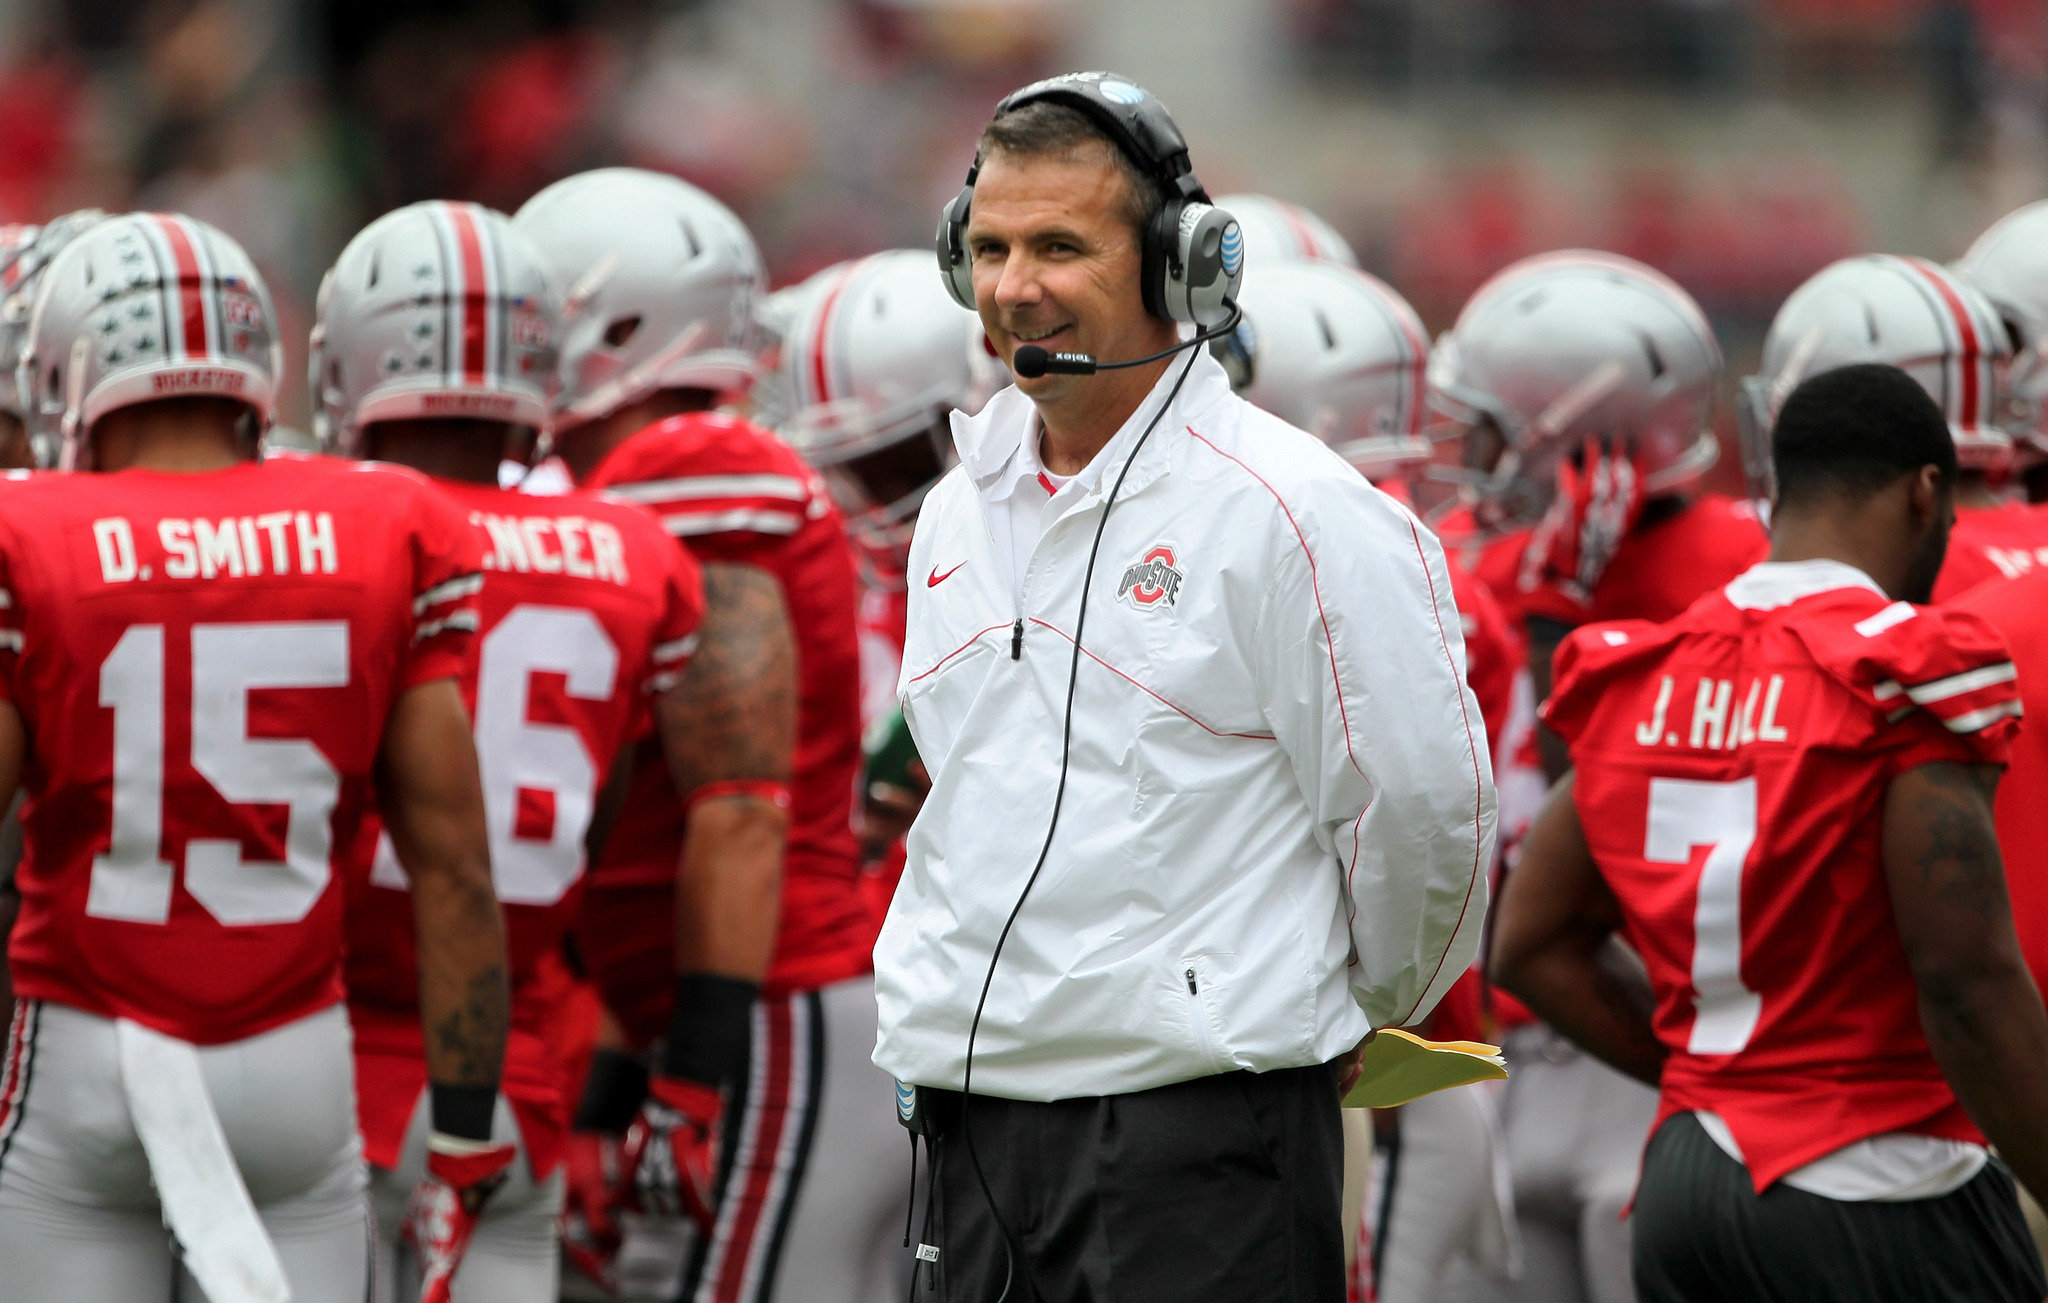 Ohio State Buckeyes vs. Rutgers Scarlet Knights: Betting odds, point spread and tv info